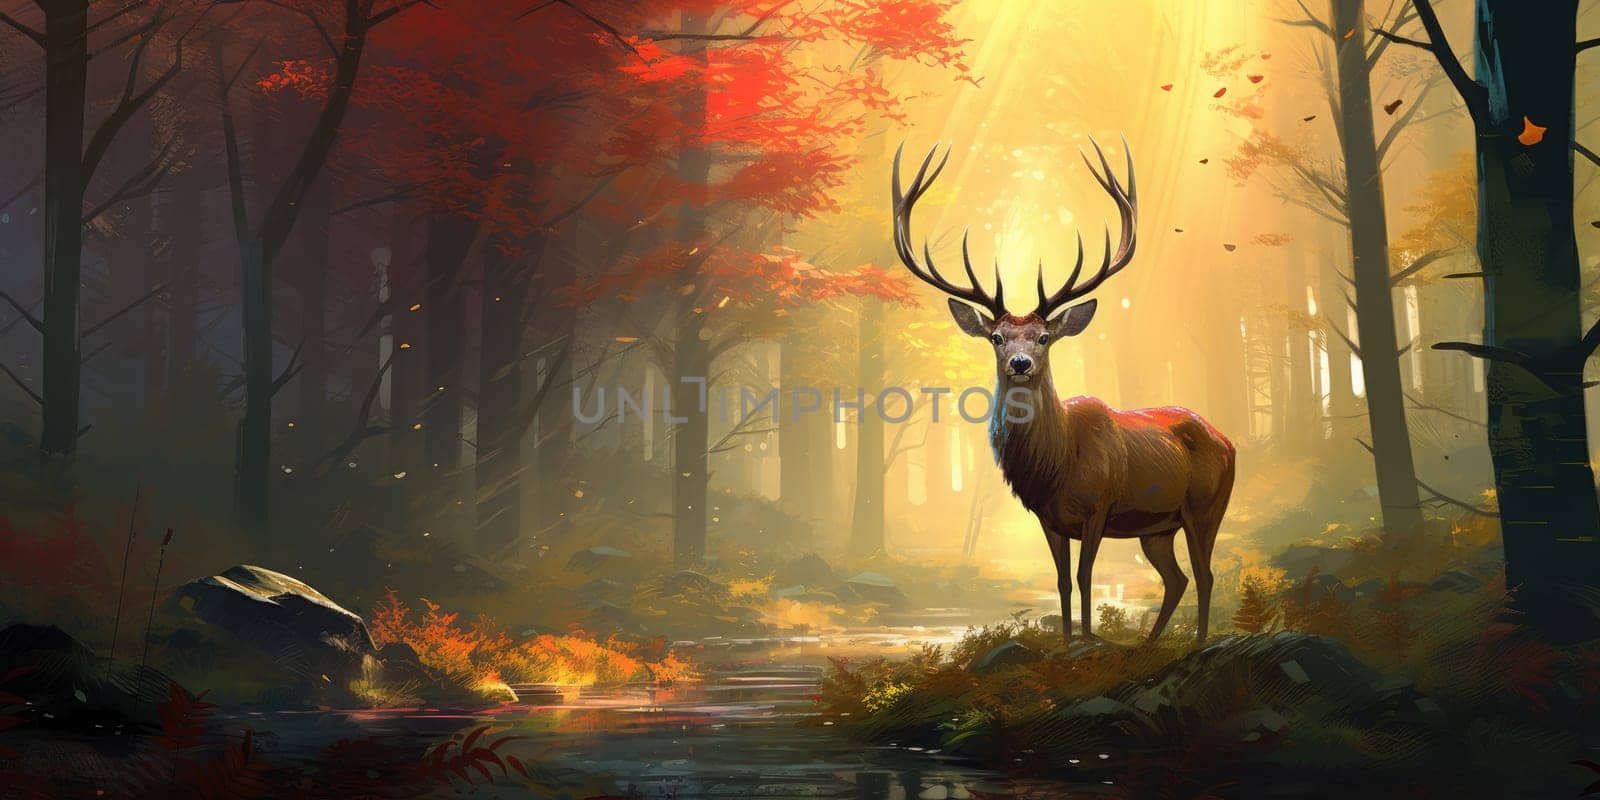 Deer in the nature, a hoofed grazing or browsing animal, with branched bony antlers that are shed annually and typically borne only by the male by Kadula